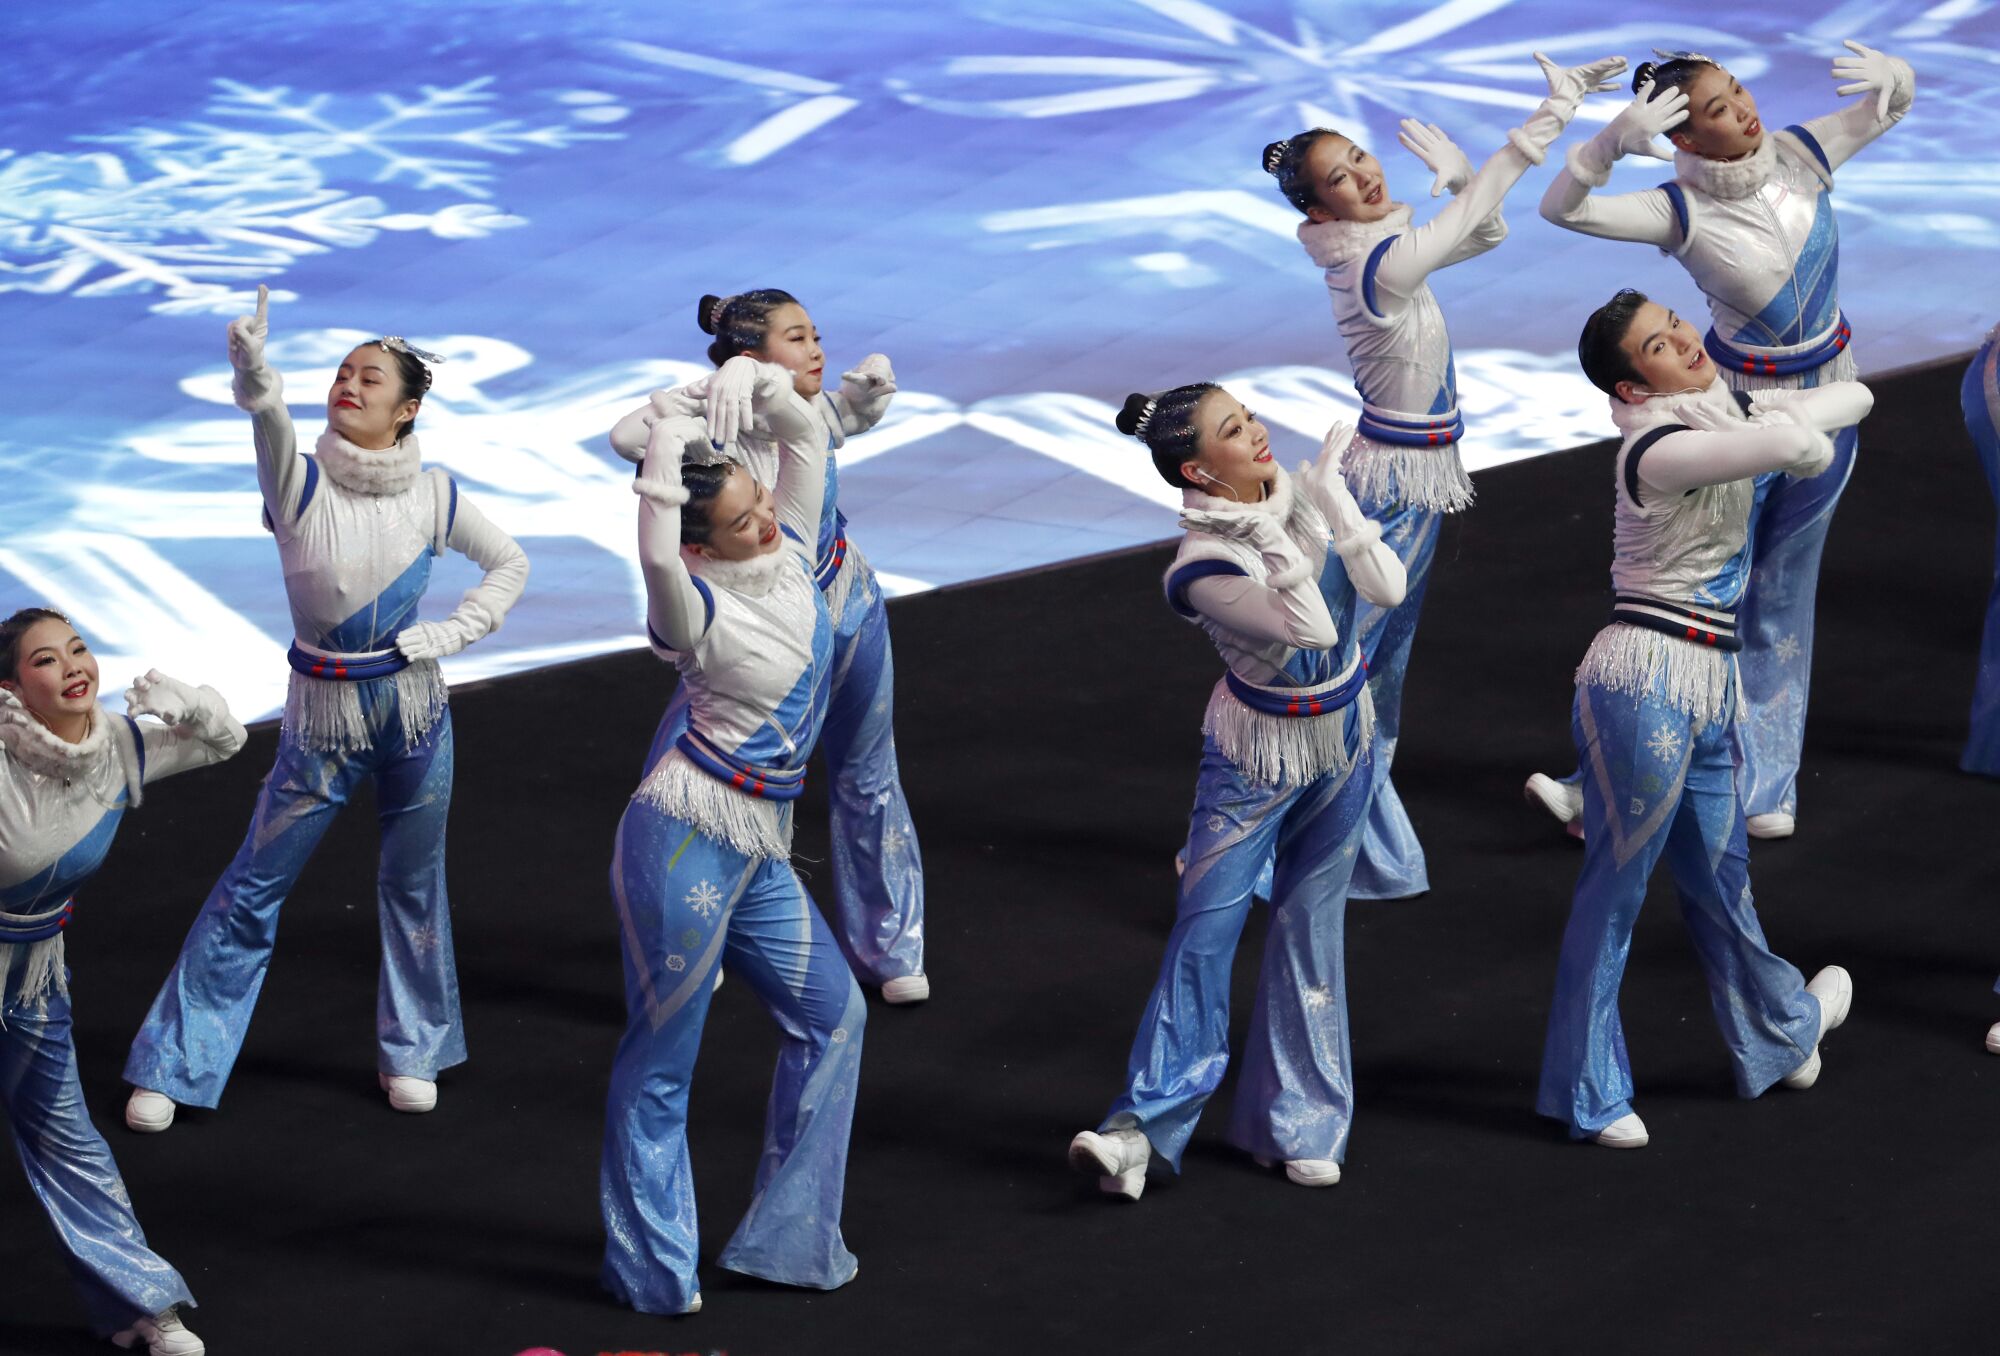 Dancers perform during the 2022 Beijing Olympics opening ceremony.